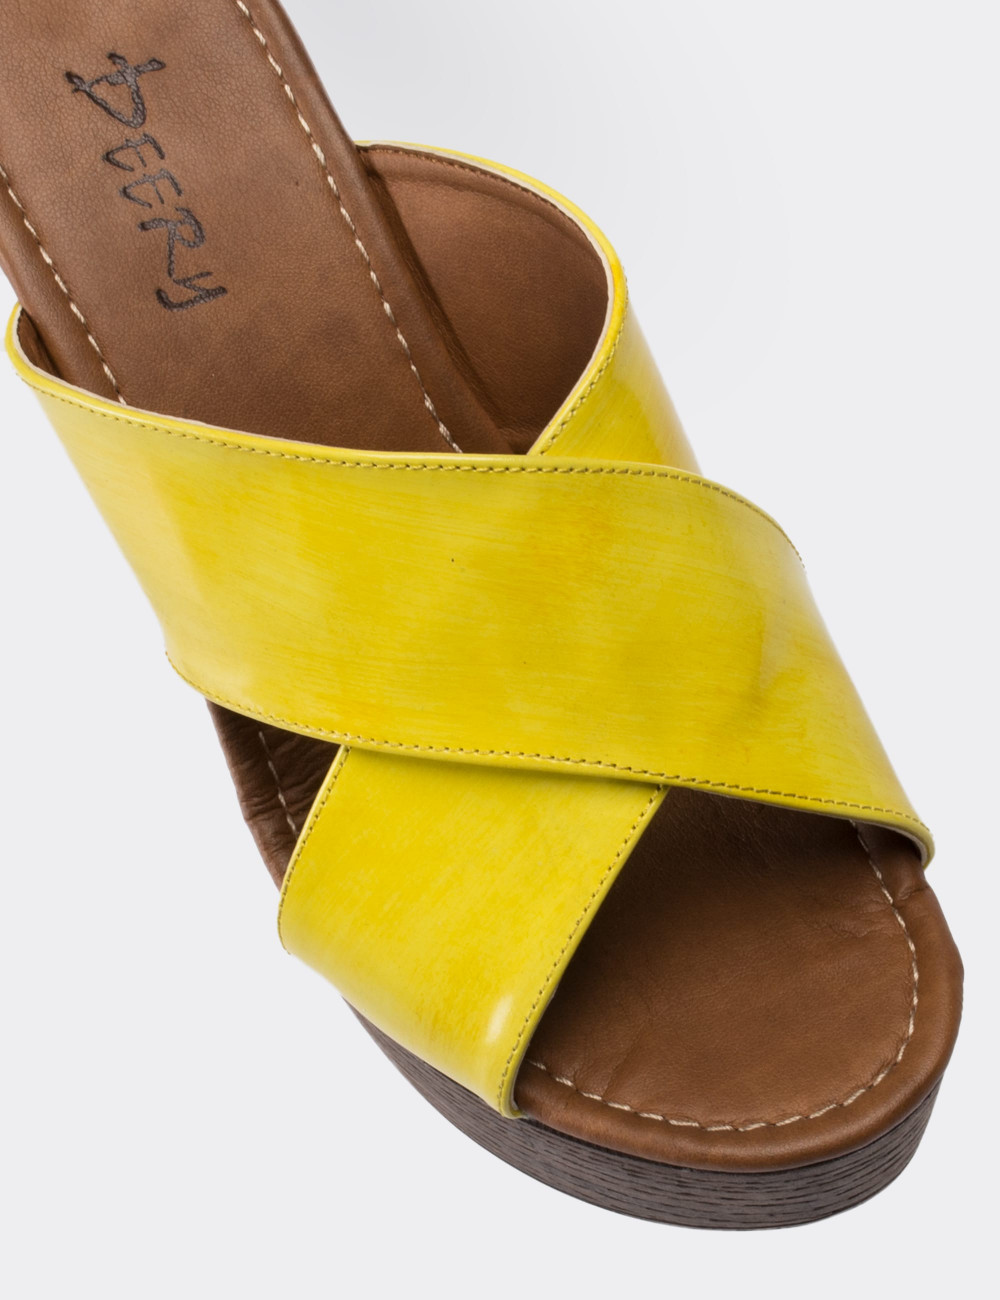 Yellow  Leather Wedge Sandals - 02050ZSRIC01